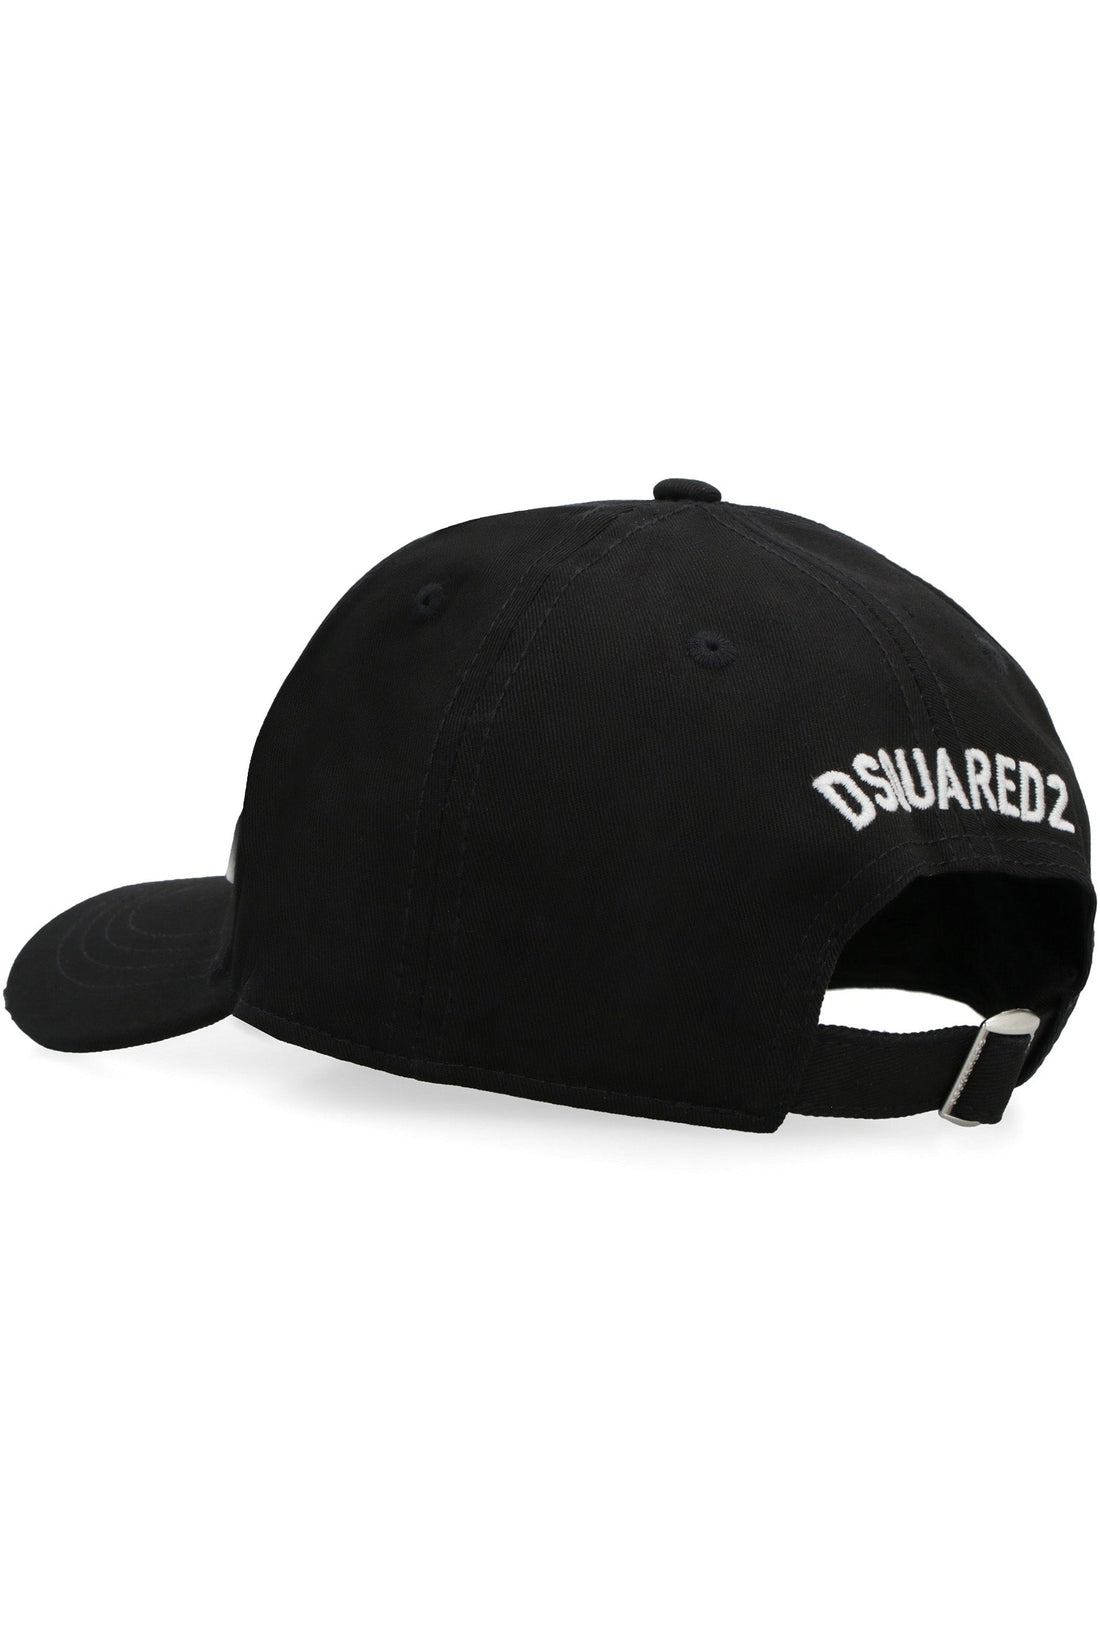 Dsquared2-OUTLET-SALE-Embroidered baseball cap-ARCHIVIST